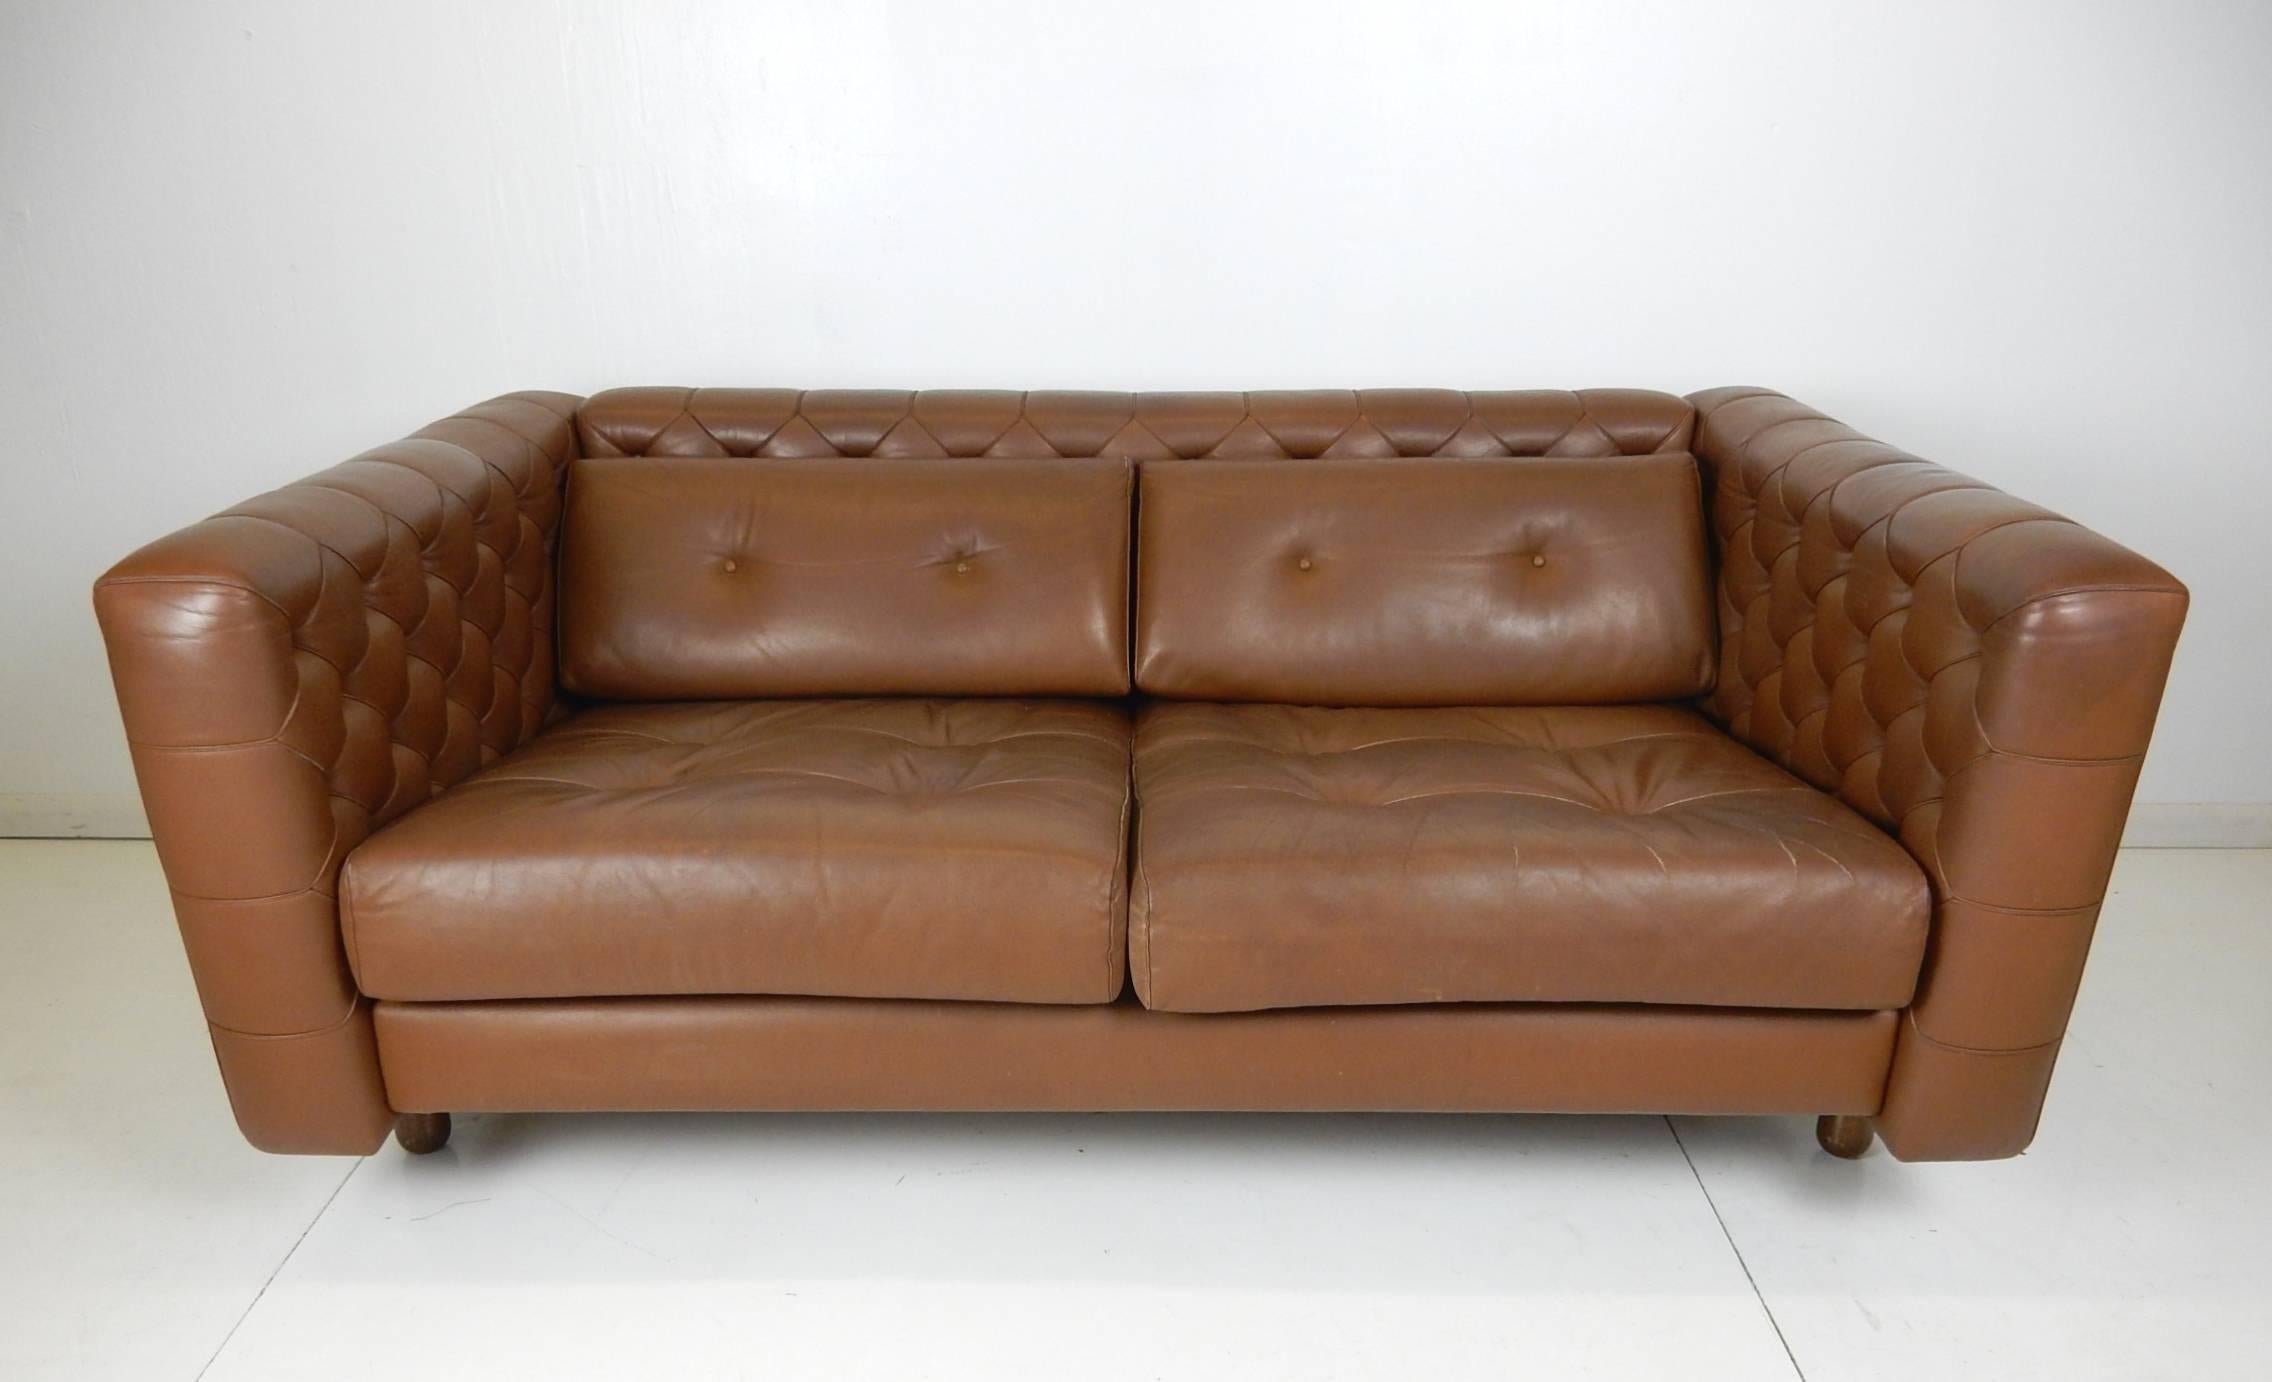 Very rare, 1960 Vico Magistretti for Cassina of Italy modernist-Chesterfield style sofa
in a luscious milk chocolate leather.
It is in excellent condition with soft foam and leather throughout.
Solid and original with not issues.
 